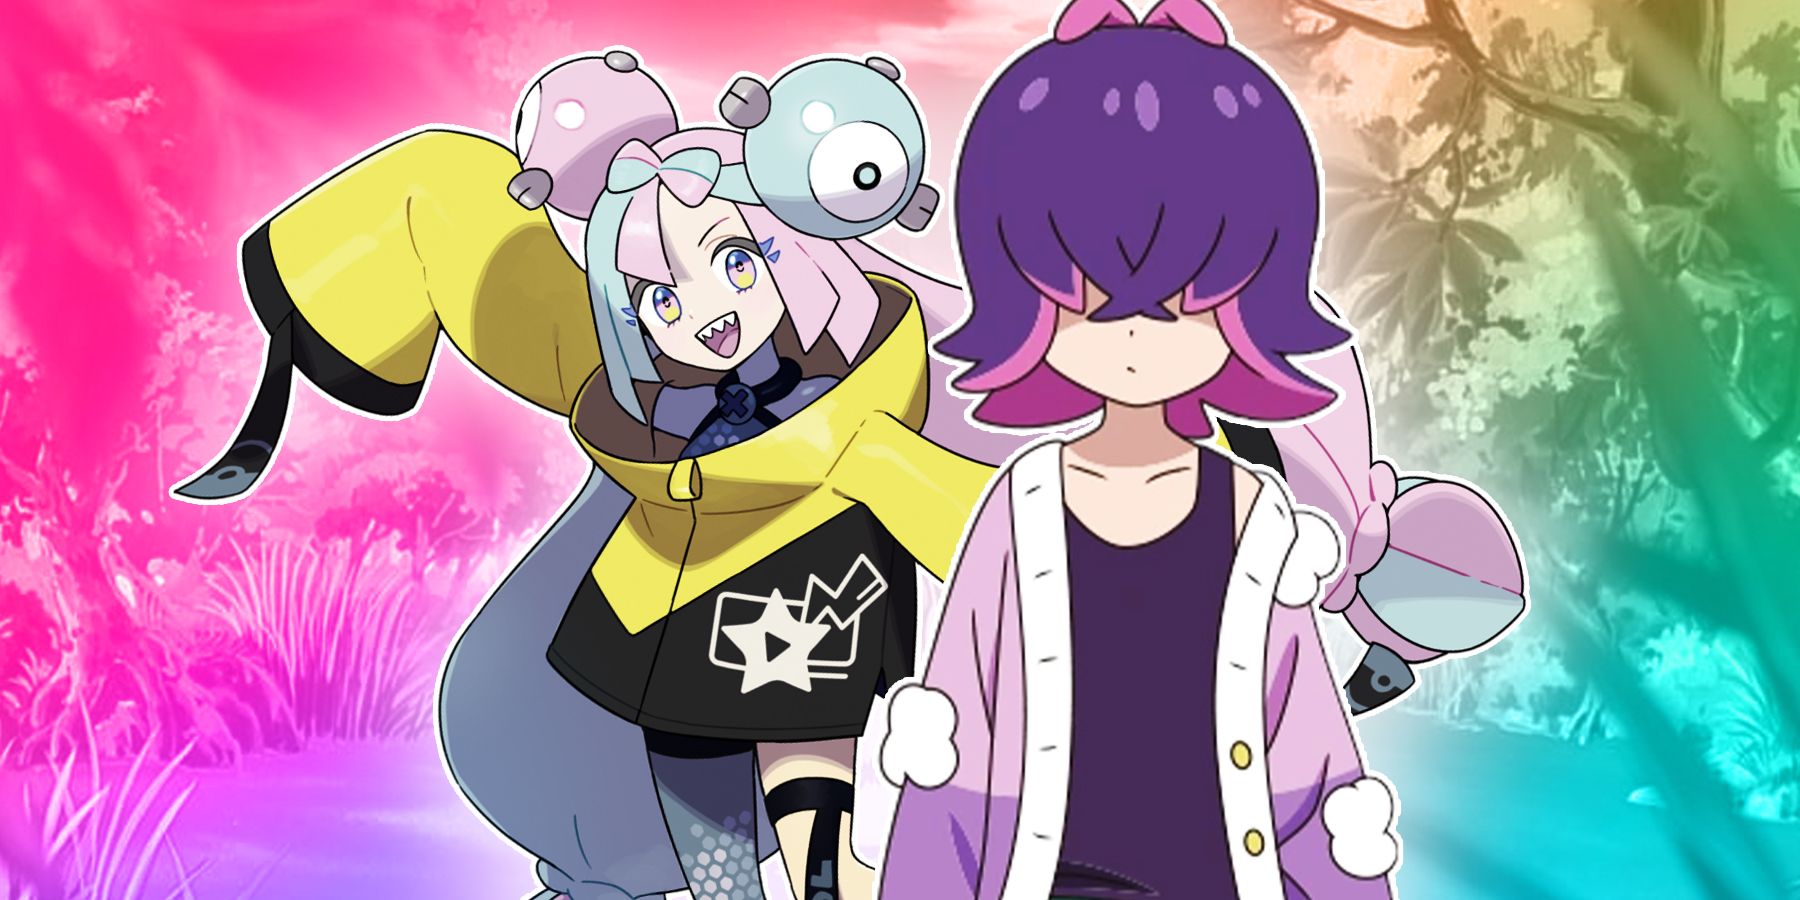 Pokemon Horizons reveals first look at Iono in new episode trailer - Dexerto